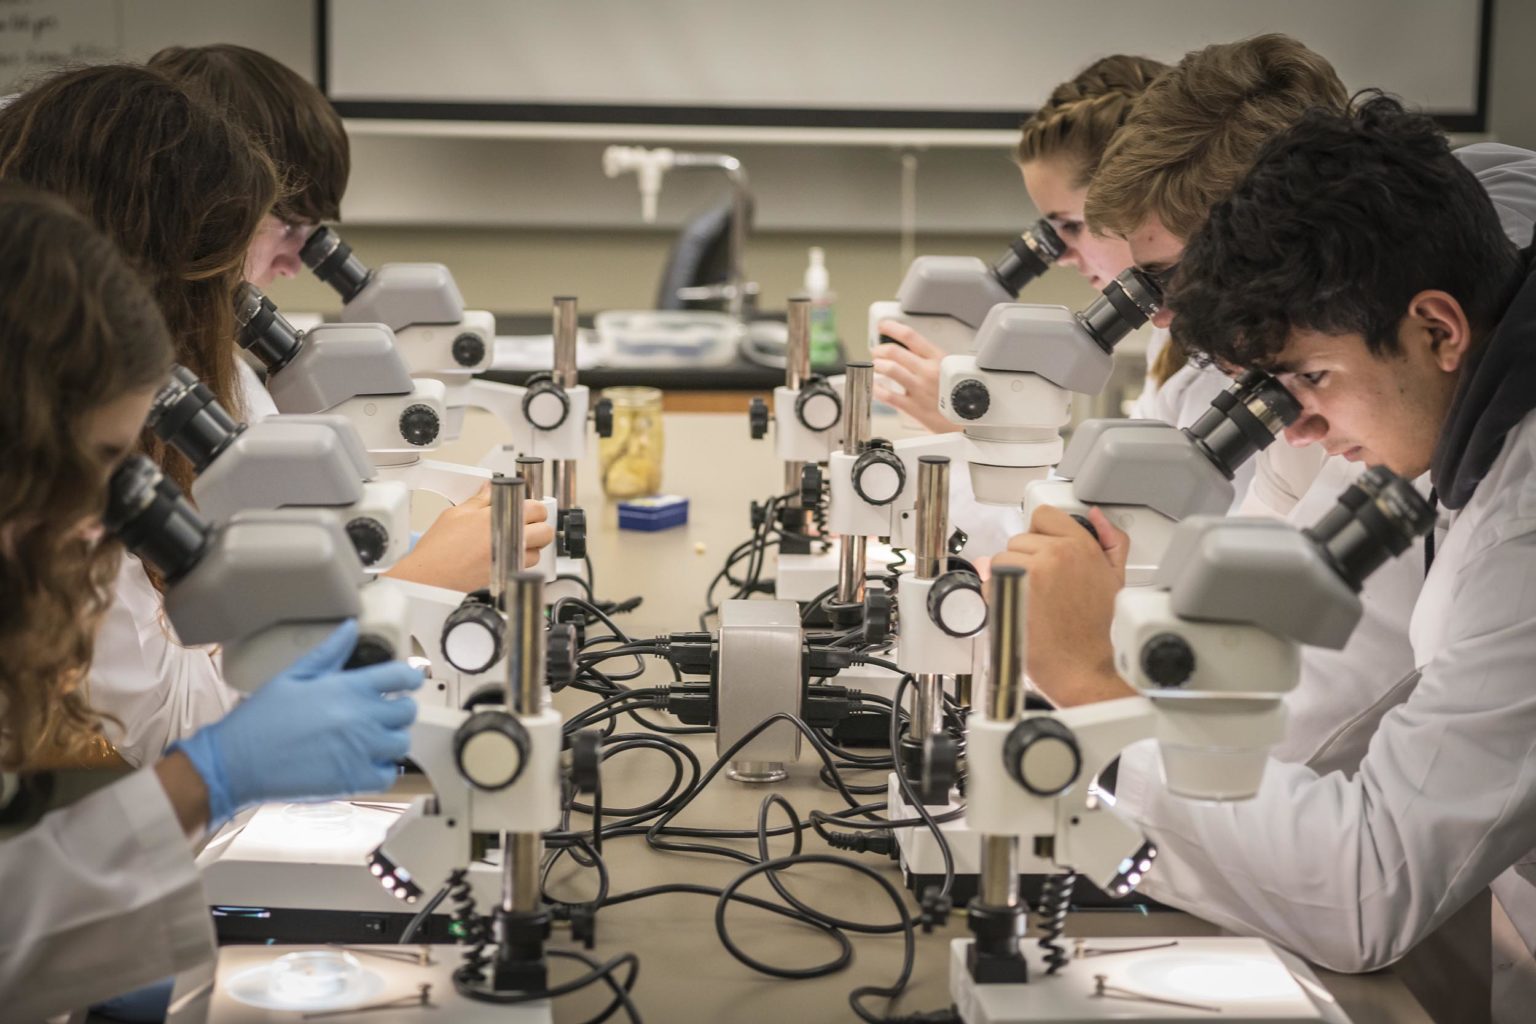 Students use microscopes at the Texas Bio Institute in Temple, TX